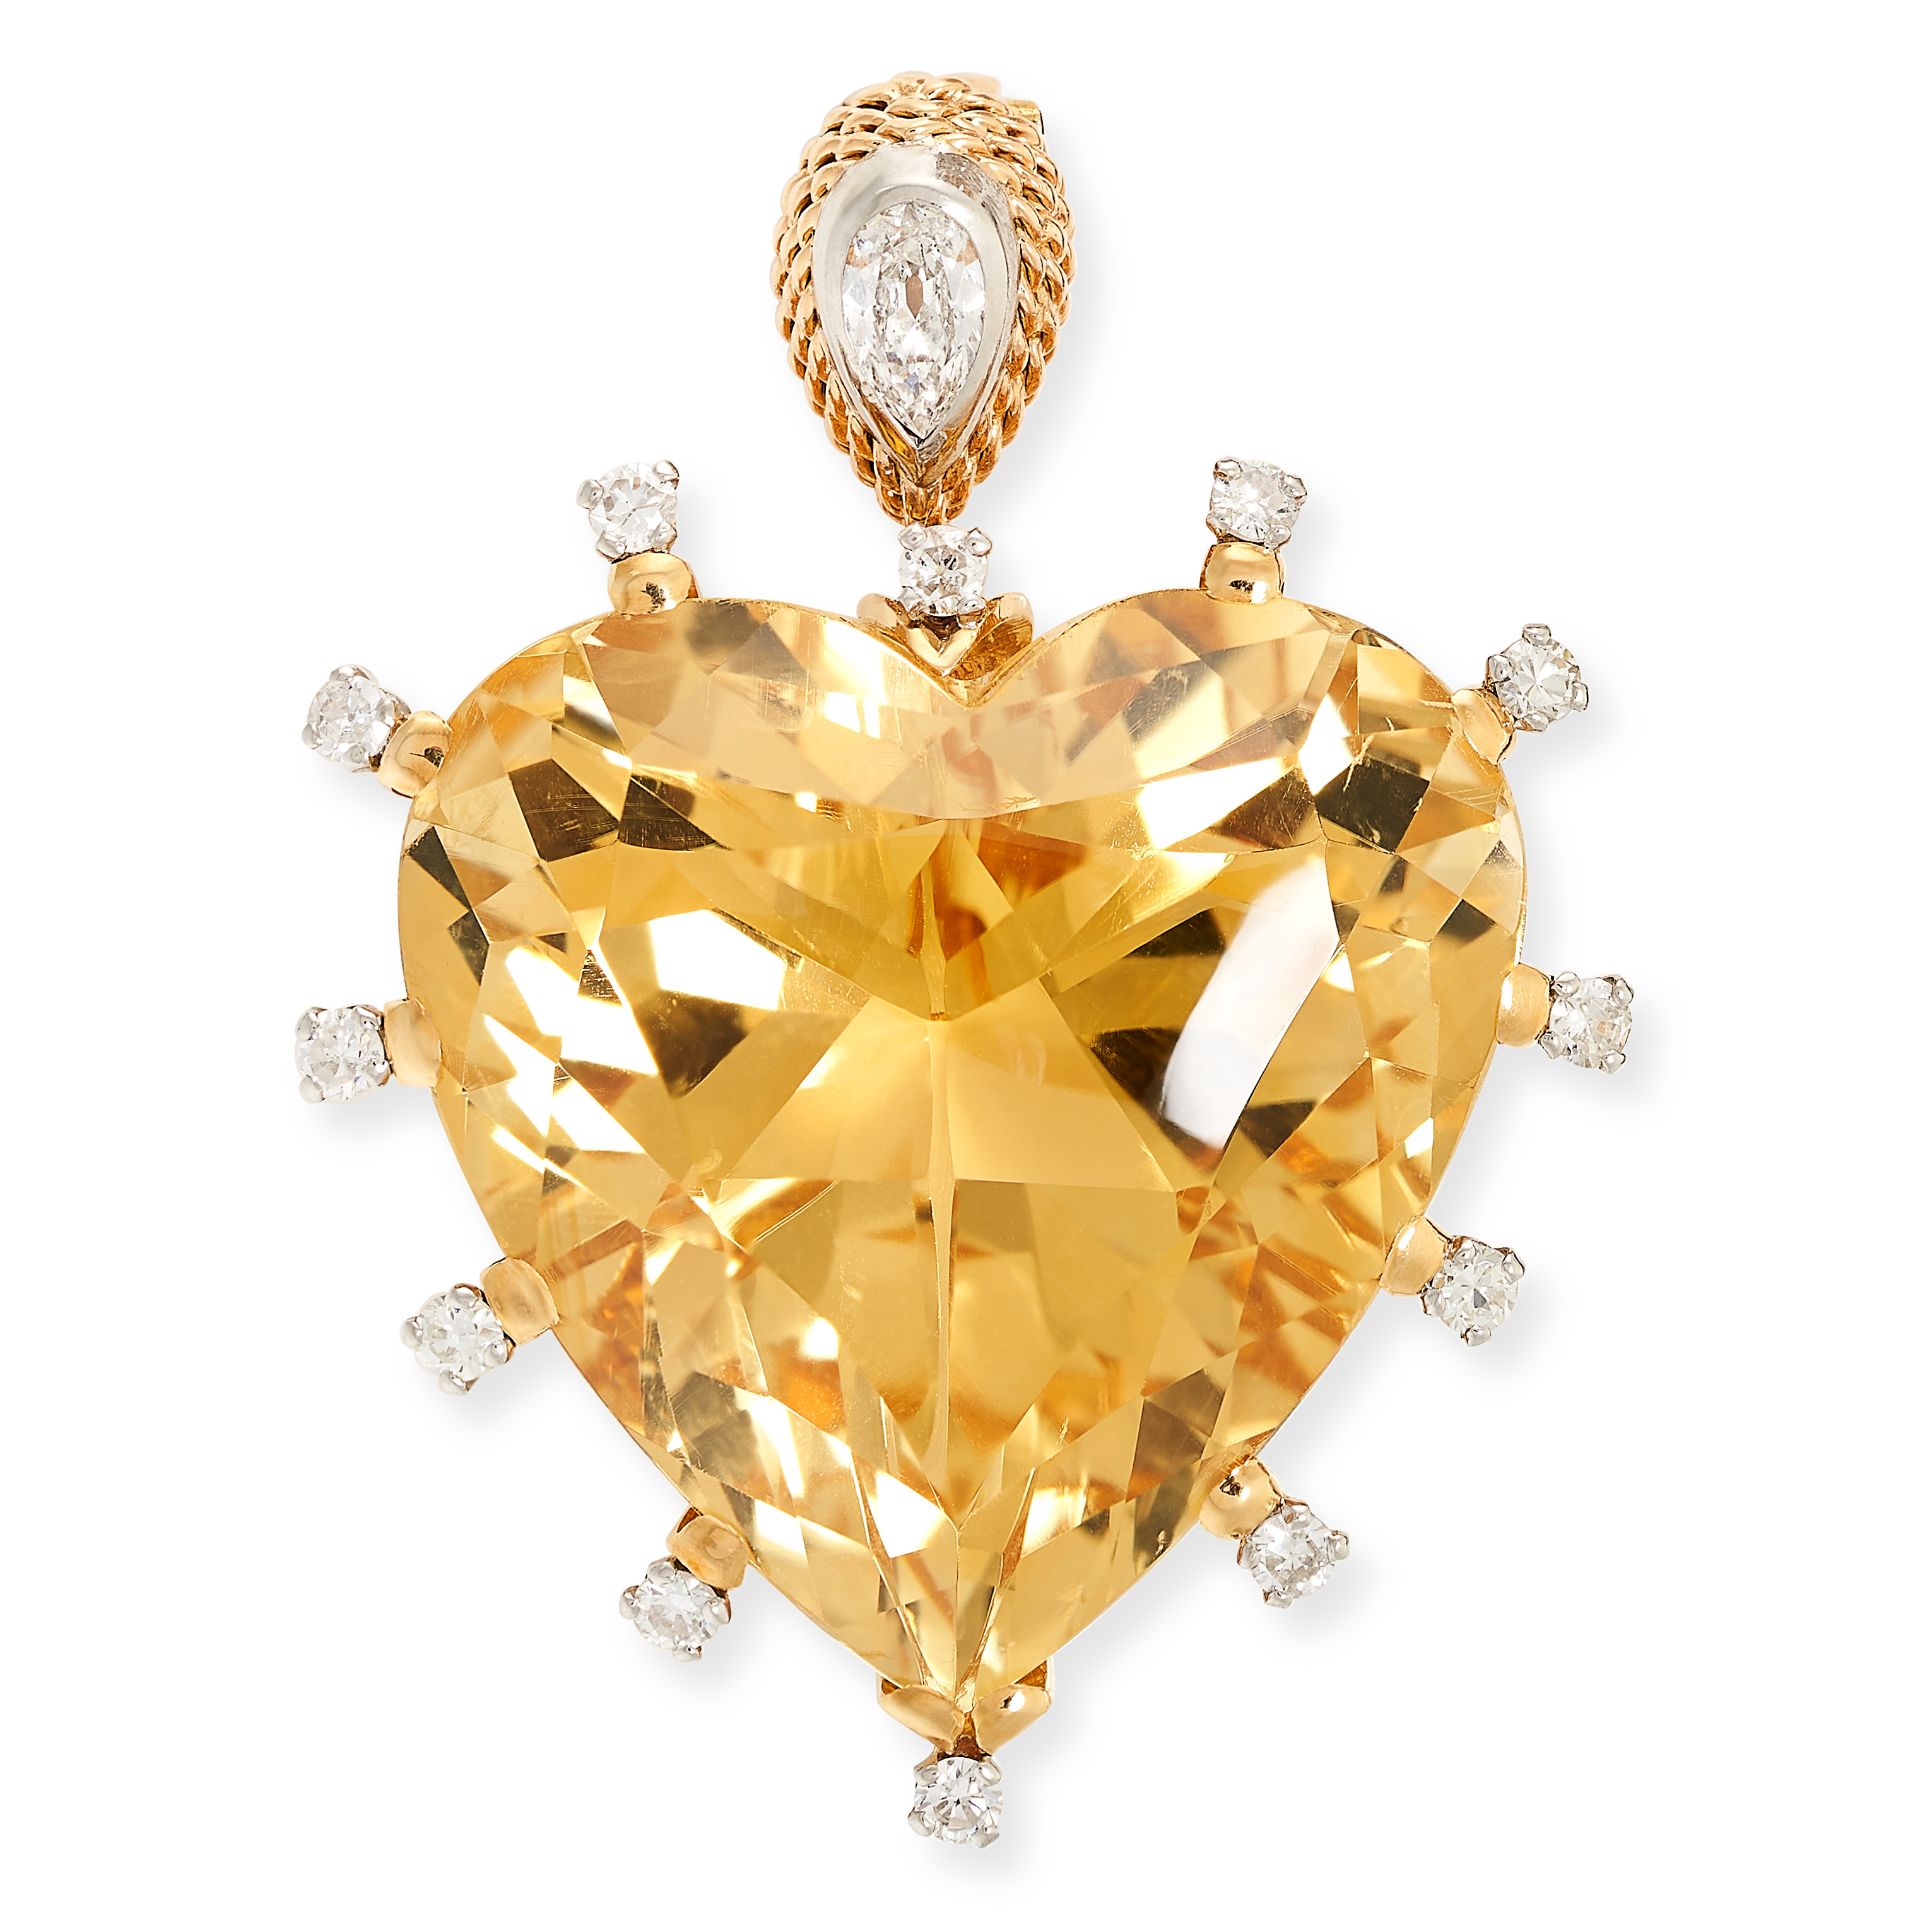 PIERRE STERLE, A FINE VINTAGE FRENCH HEART SHAPED CITRINE AND DIAMOND PENDANT in 18ct yellow gold